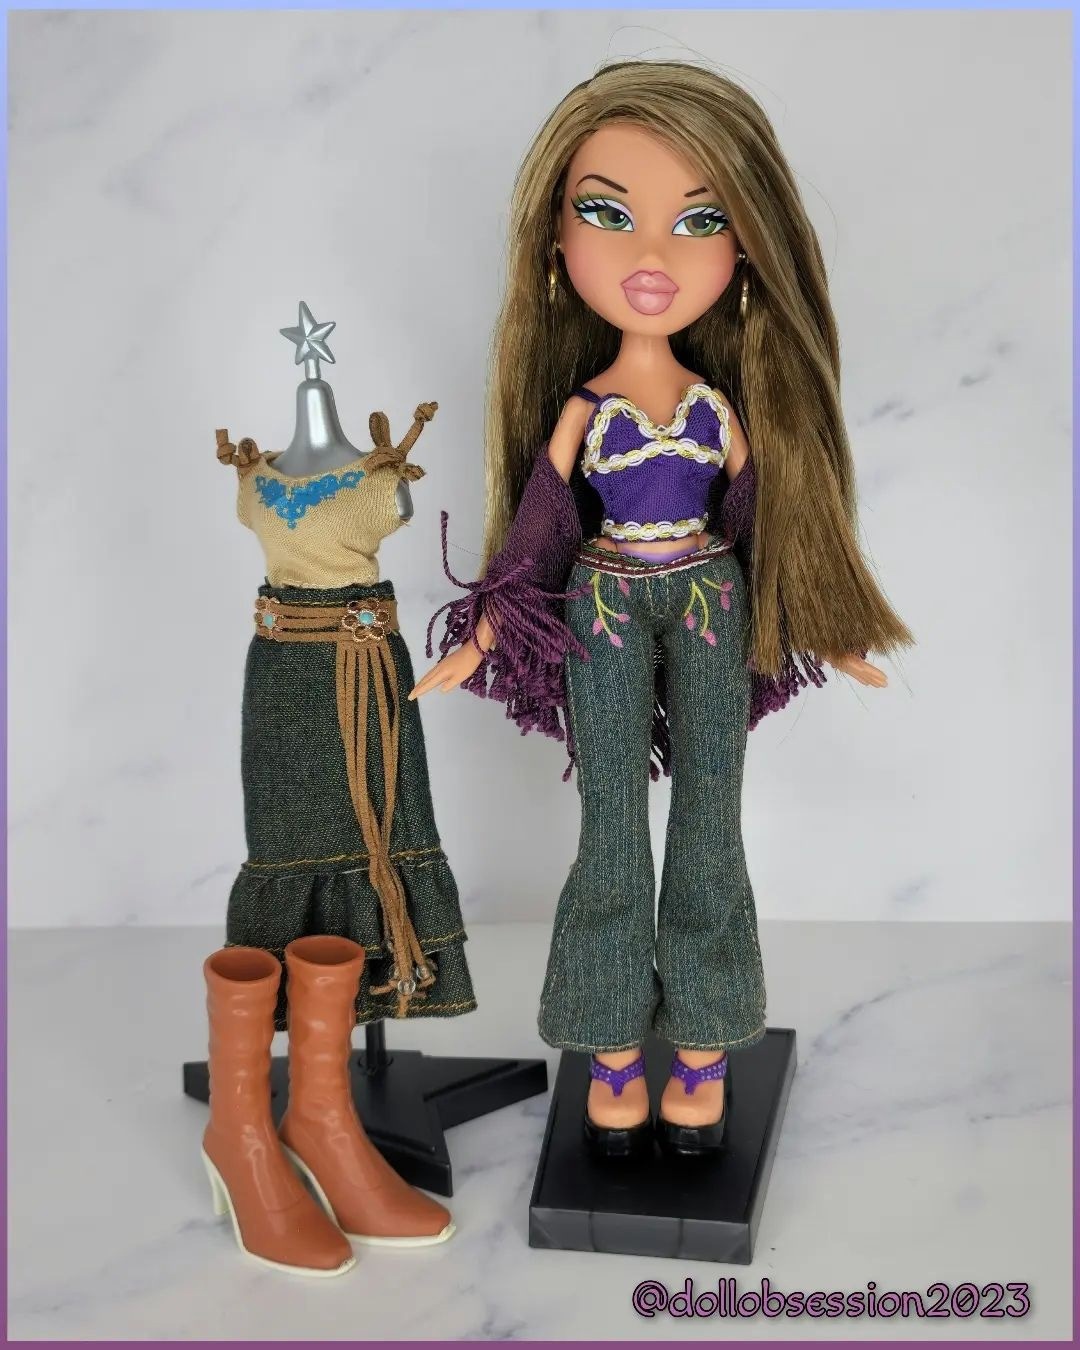 Bratz Reproduction Series 3 Fianna Doll Review for Adult